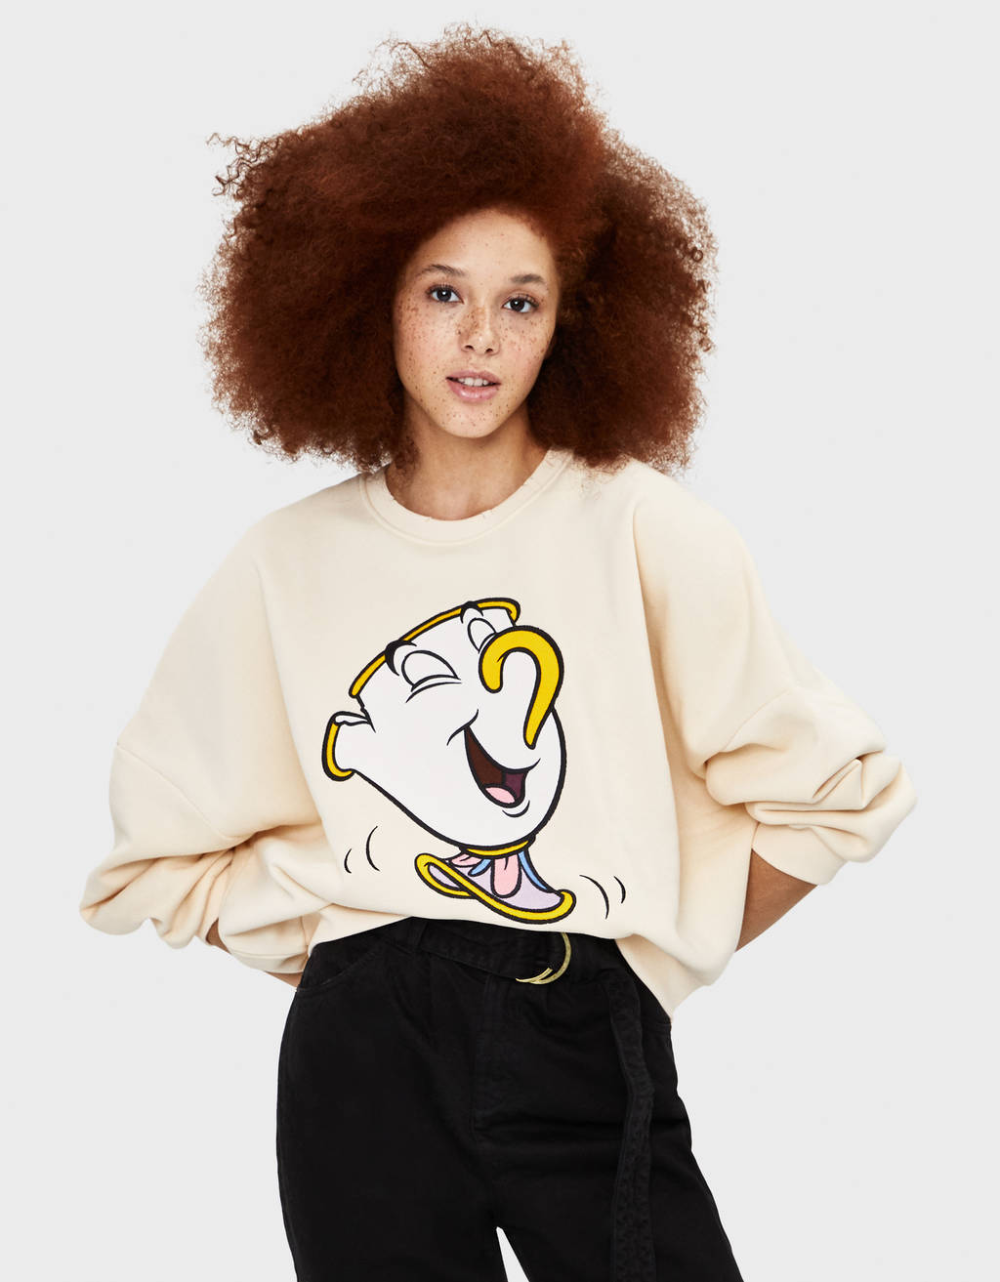 Beauty and the Beast sweatshirt - Collaborations® - Bershka United States - Beauty and the Beast sweatshirt - Collaborations® - Bershka United States -   14 beauty And The Beast outfit ideas